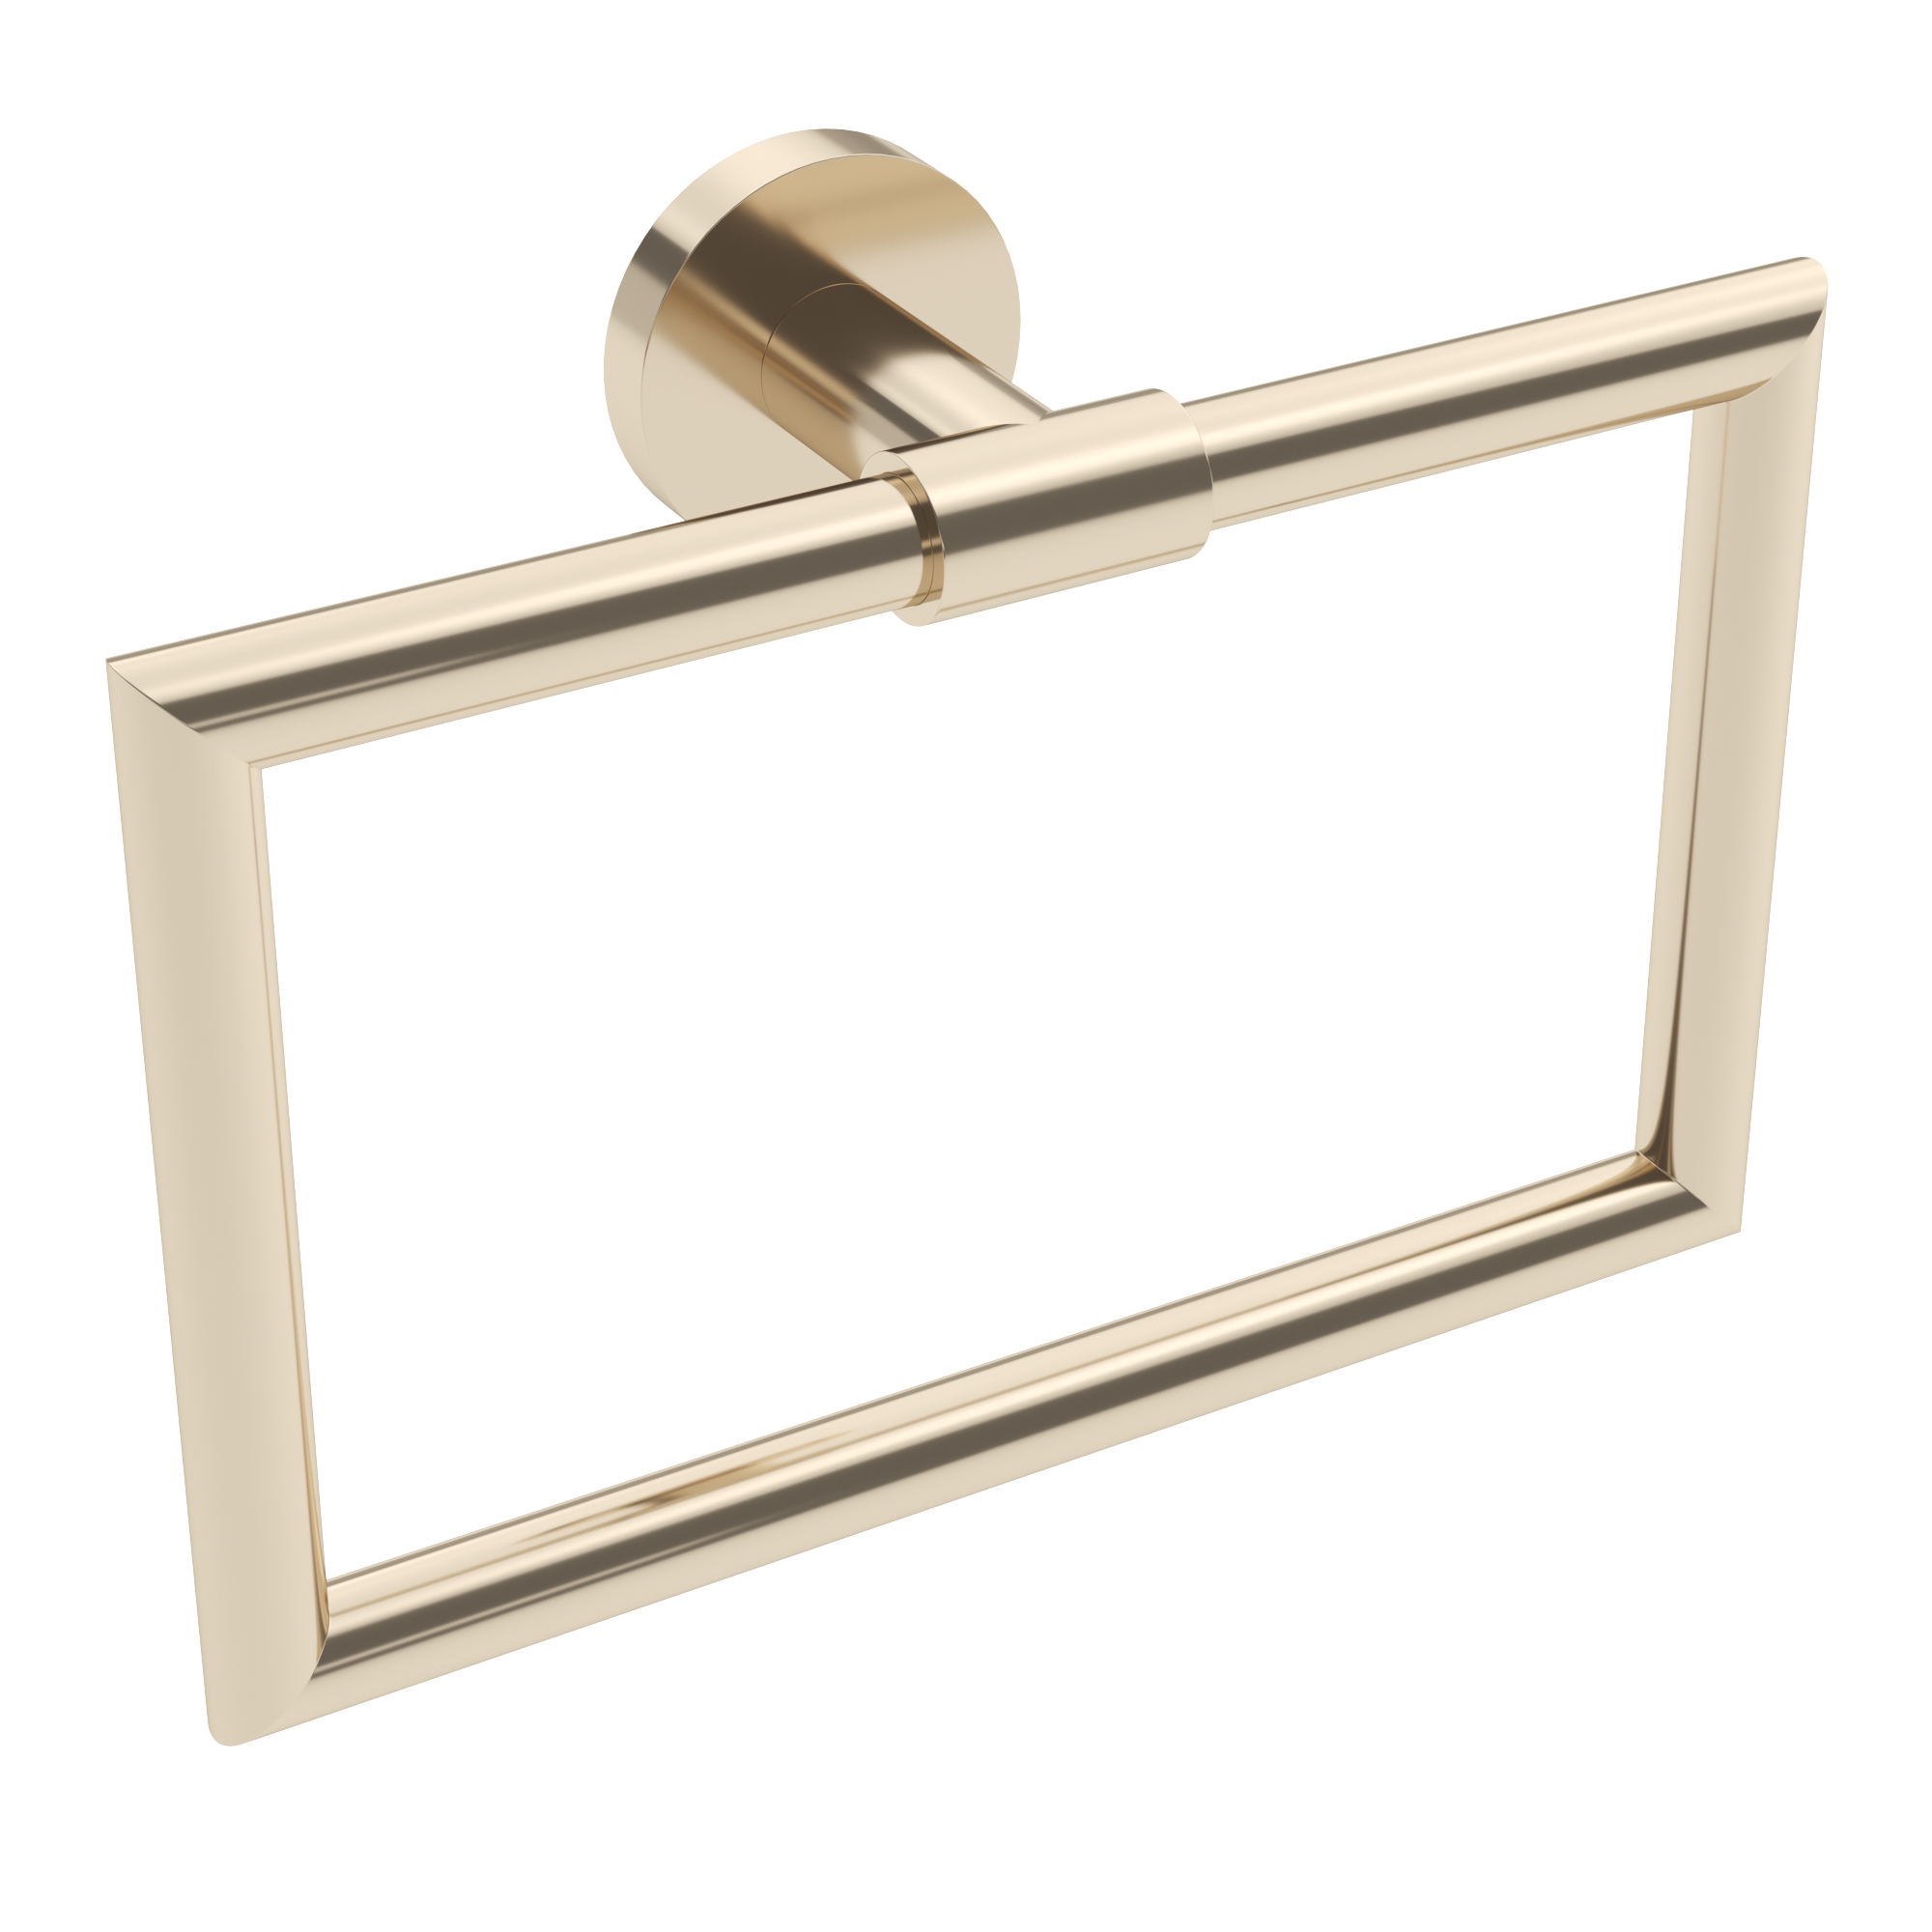 NORDIC B5231, Towel ring Chromed brass towel ring By Colombo Design